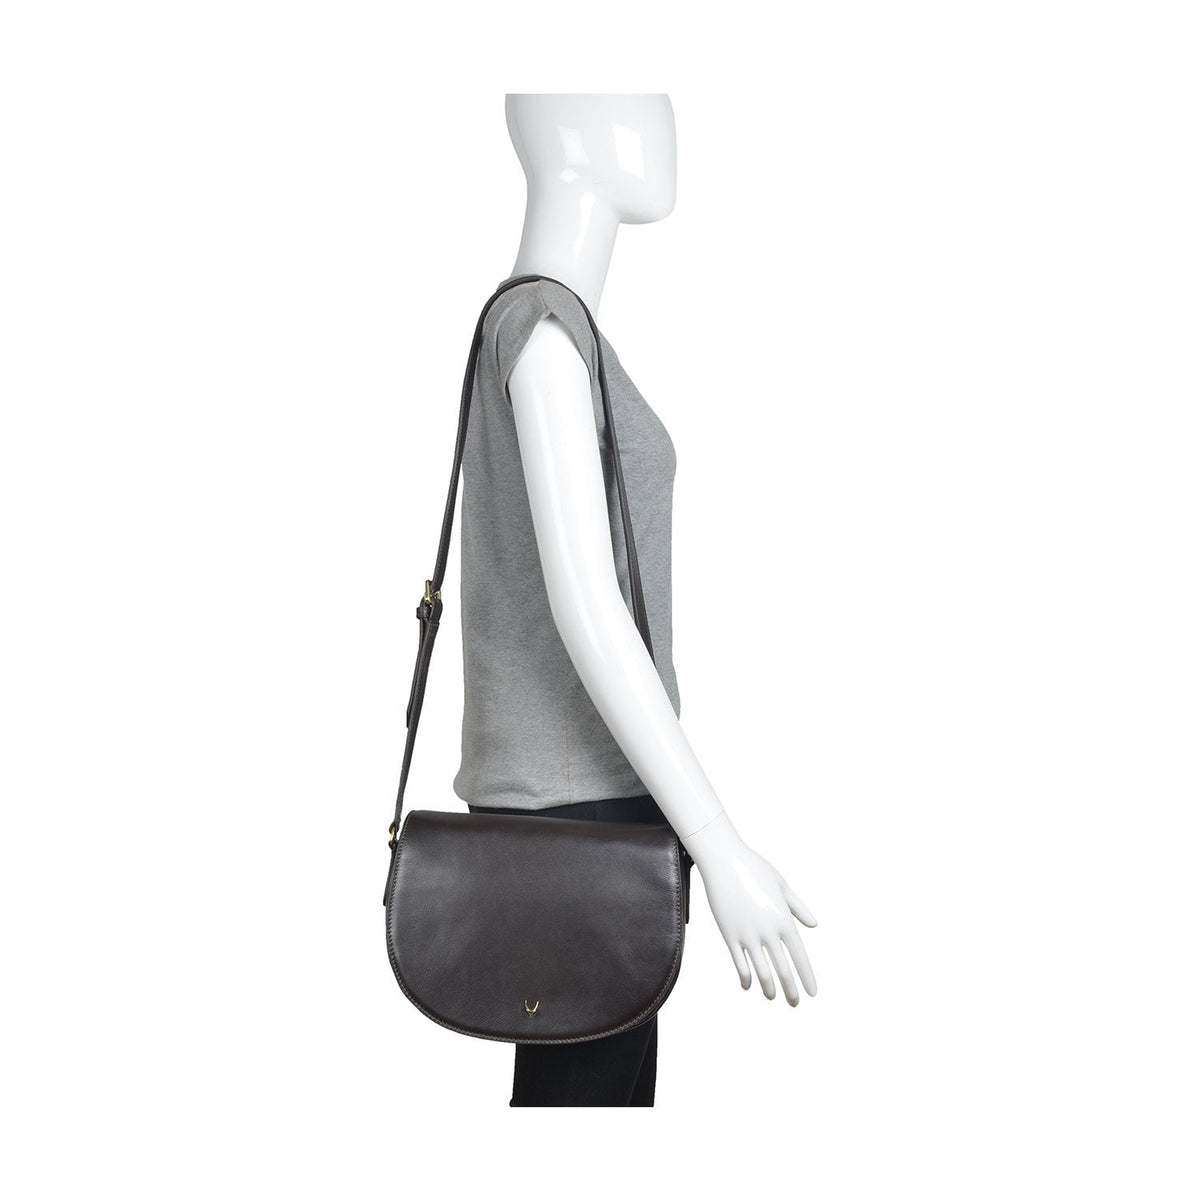 Bags & Luggage - Women's Bags - Crossbody Bags Nelly Classic Leather Crossbody Bag